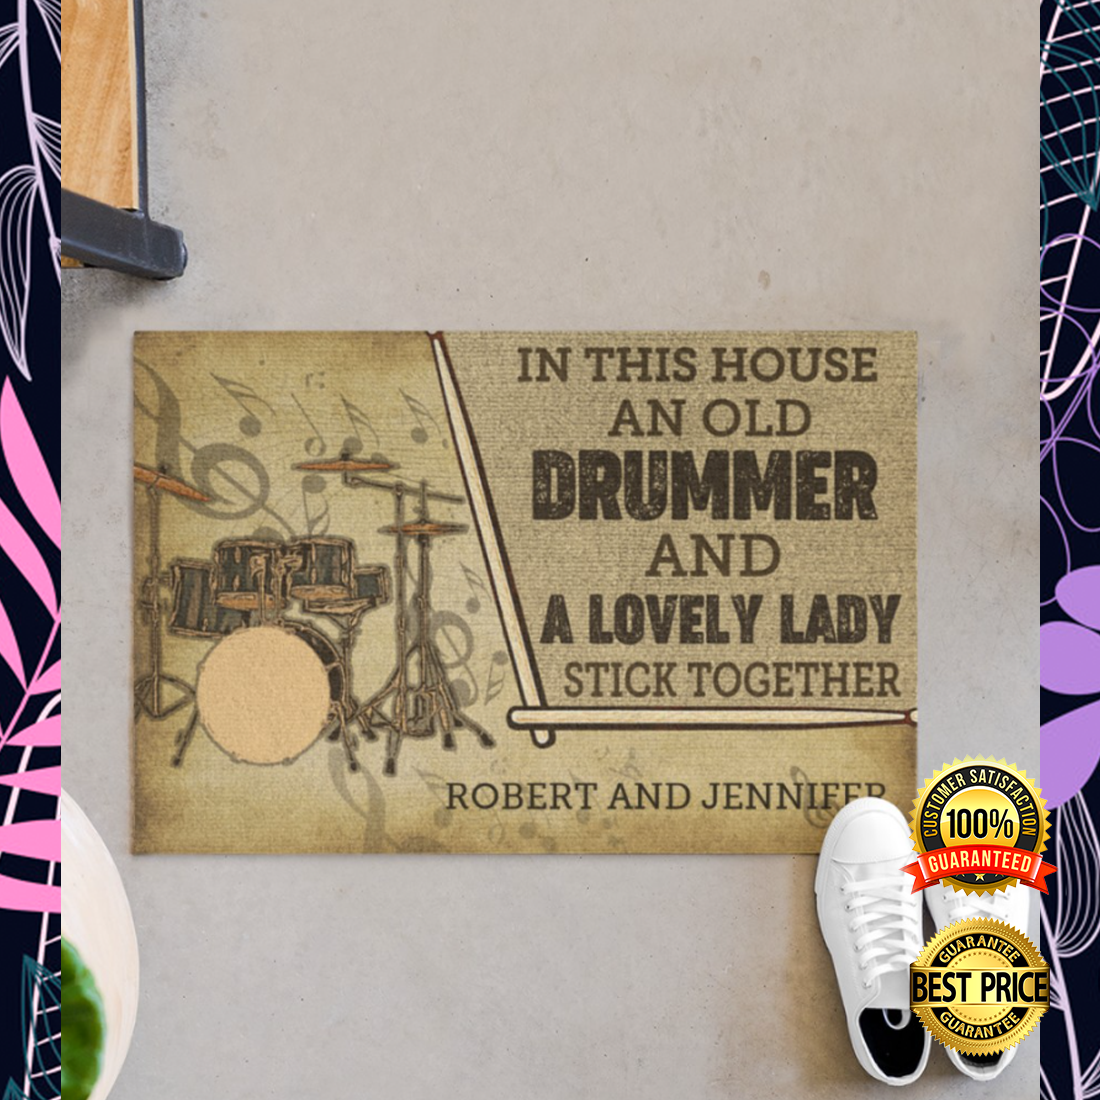 Personalized in this house an old drummer and a lovely lady stick together doormat 5